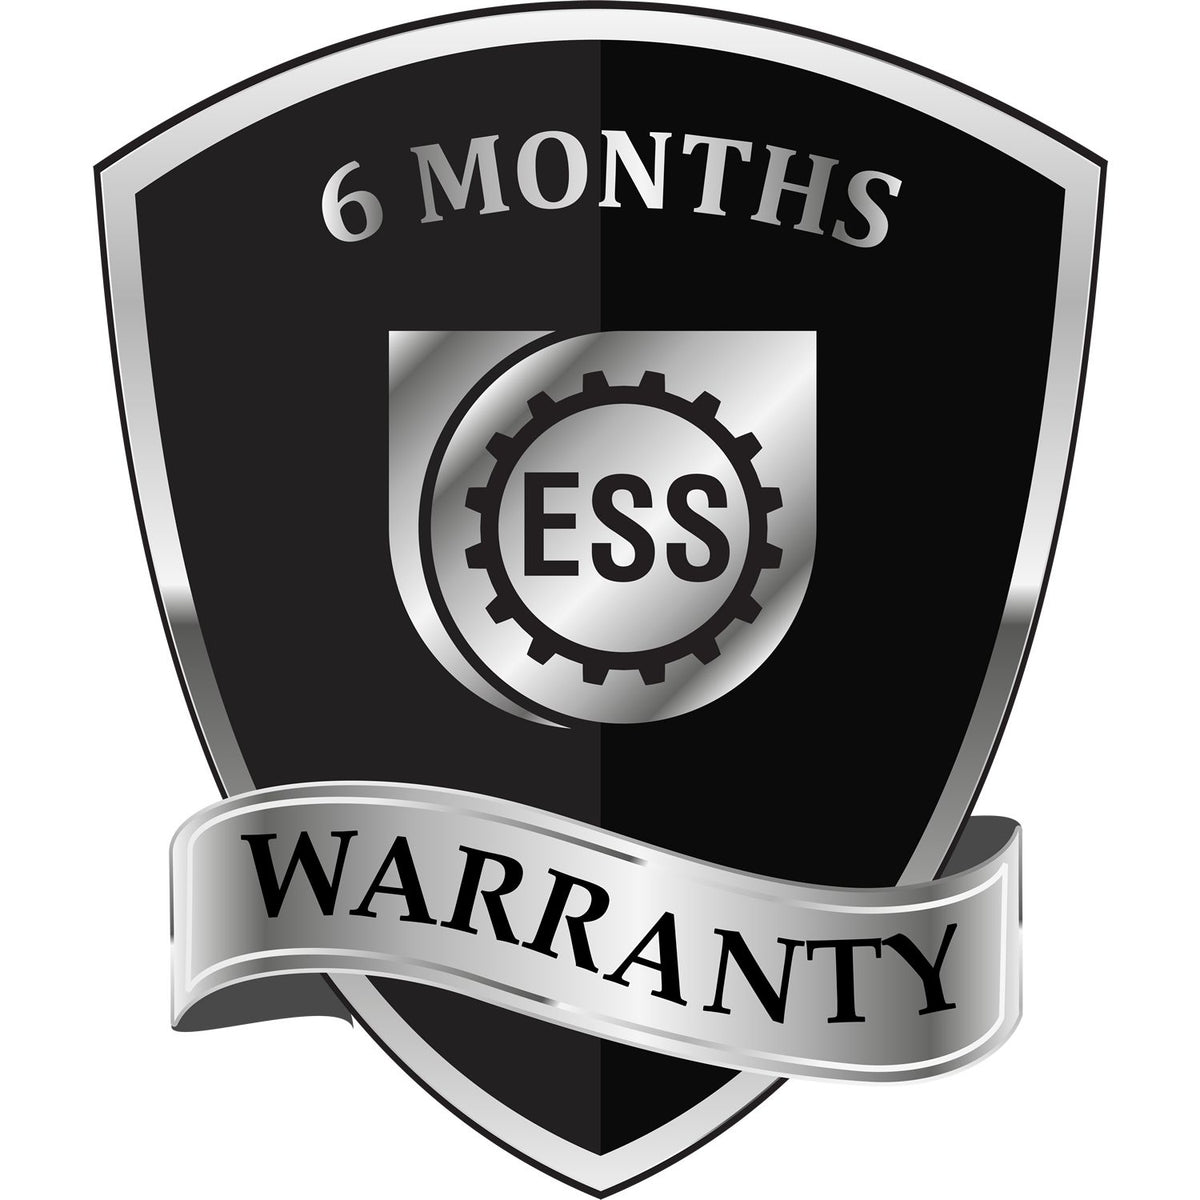 A badge or emblem showing a warranty icon for the Self-Inking Illinois PE Stamp